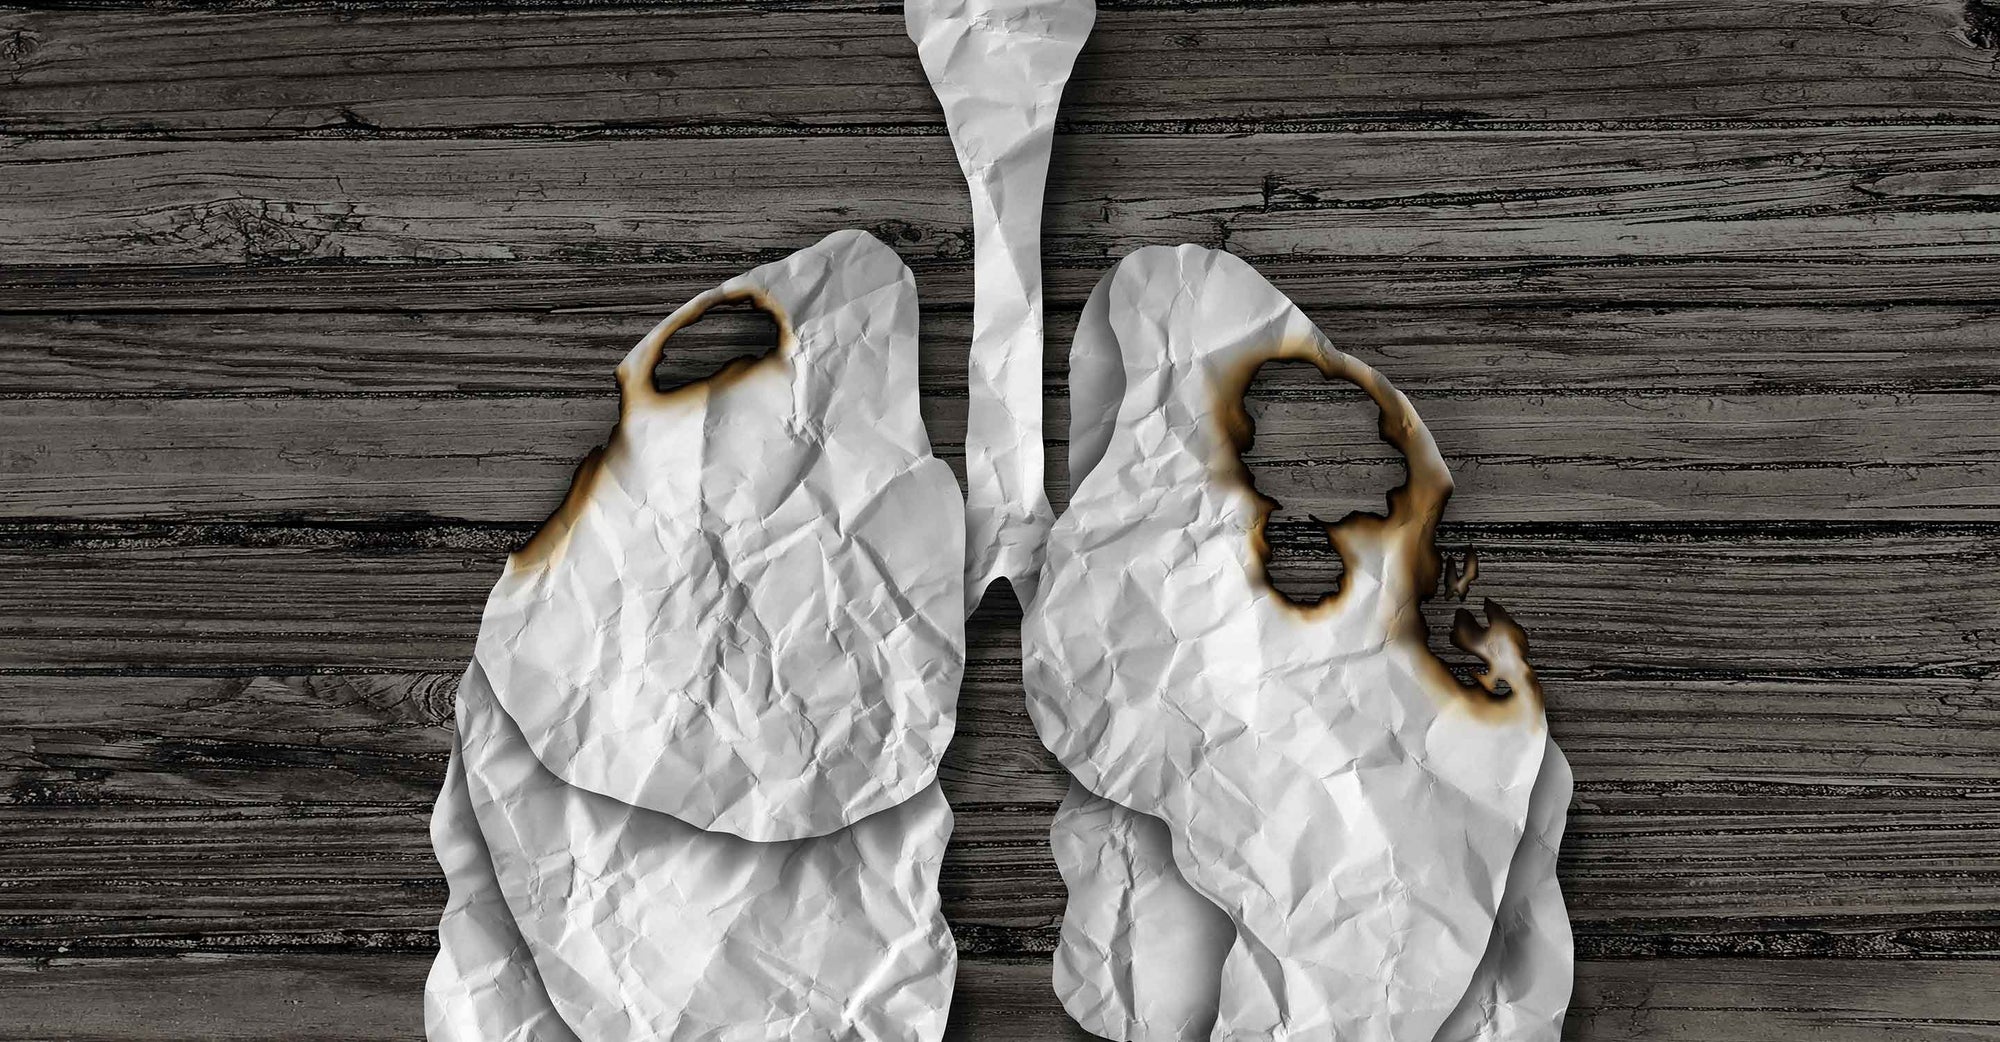 Lungs affected by cancer